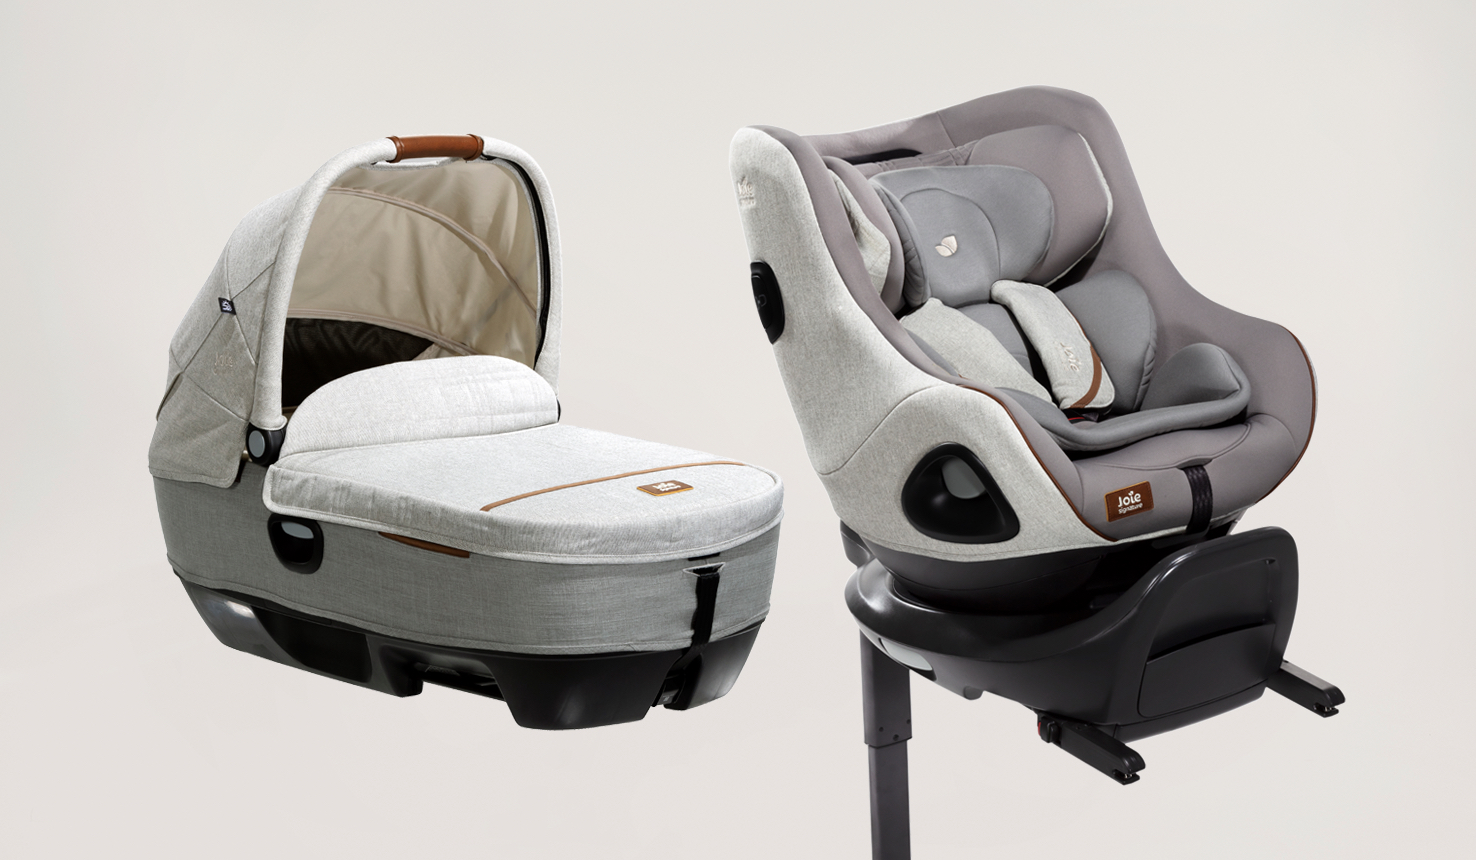 Gray Calmi R129 car cot beside a gray I-Harbour toddler seat.